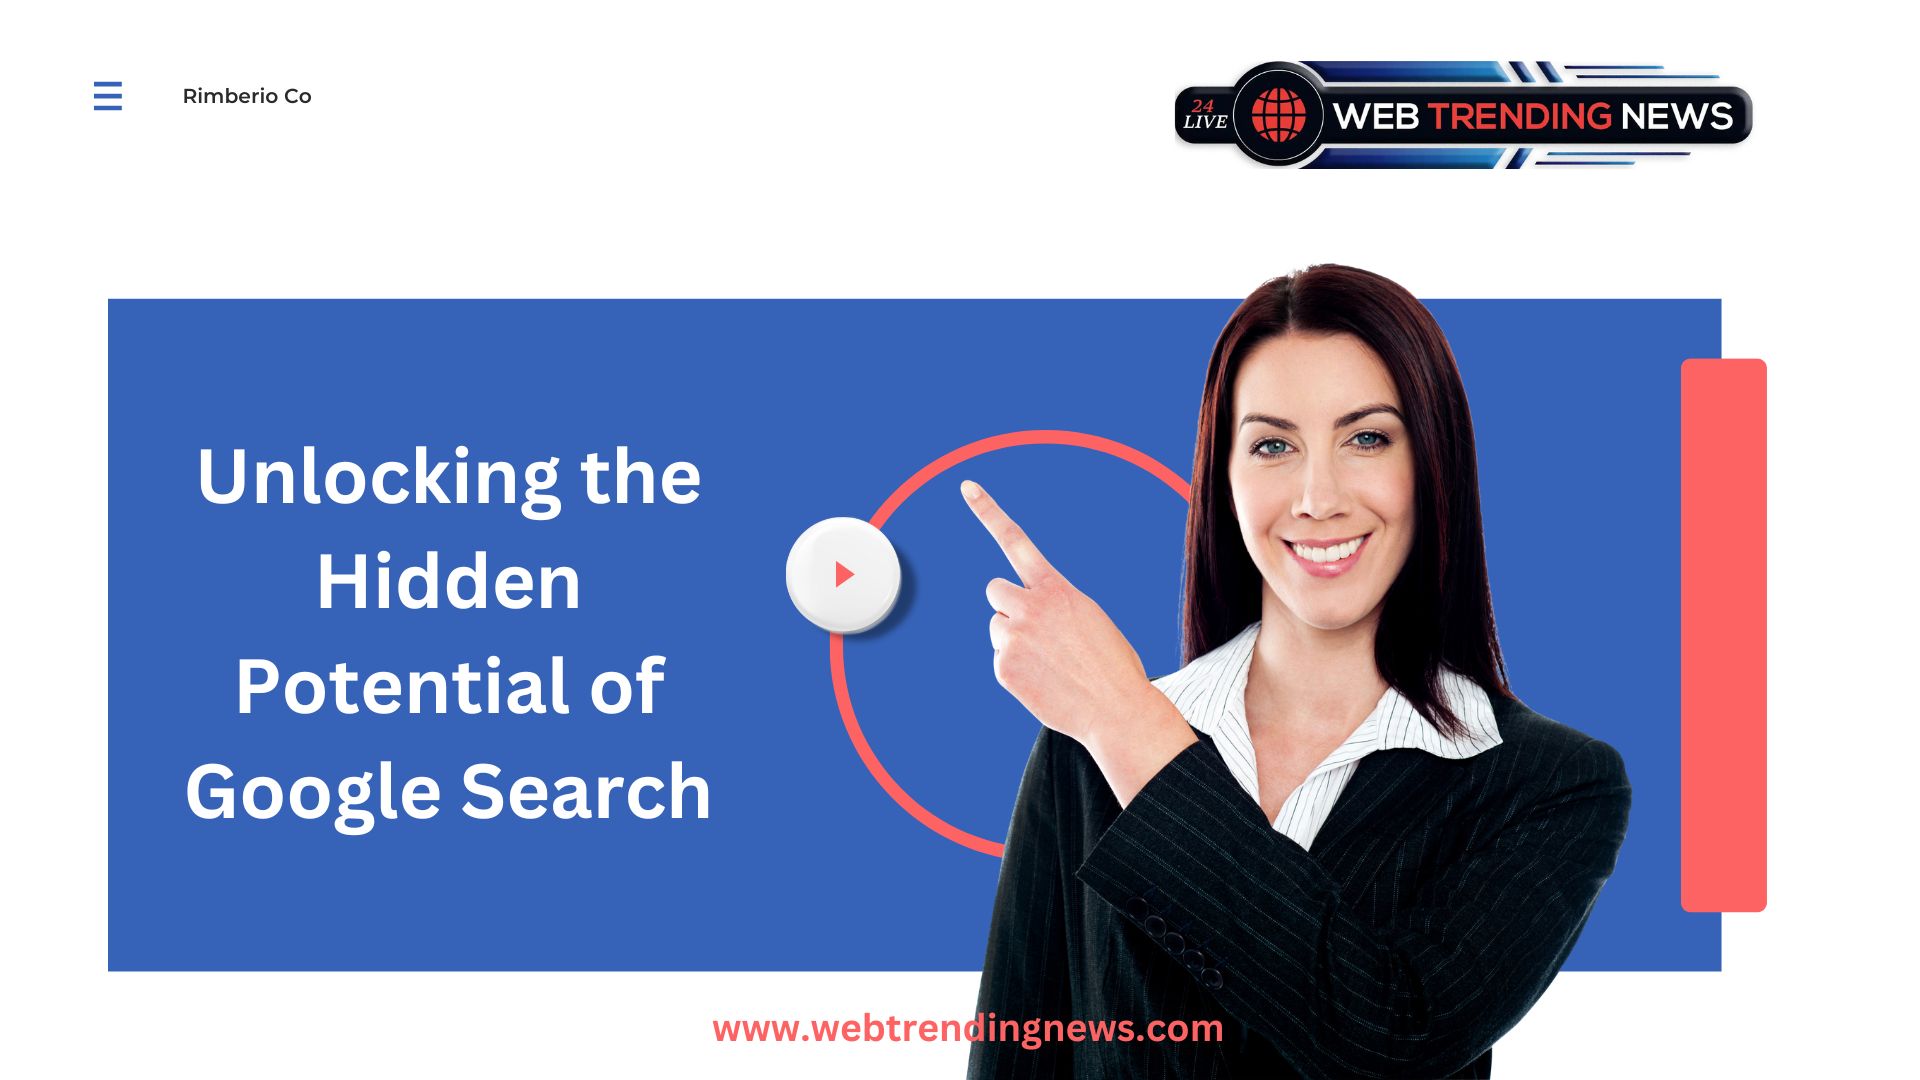 Unlocking the Hidden Potential of Google Search